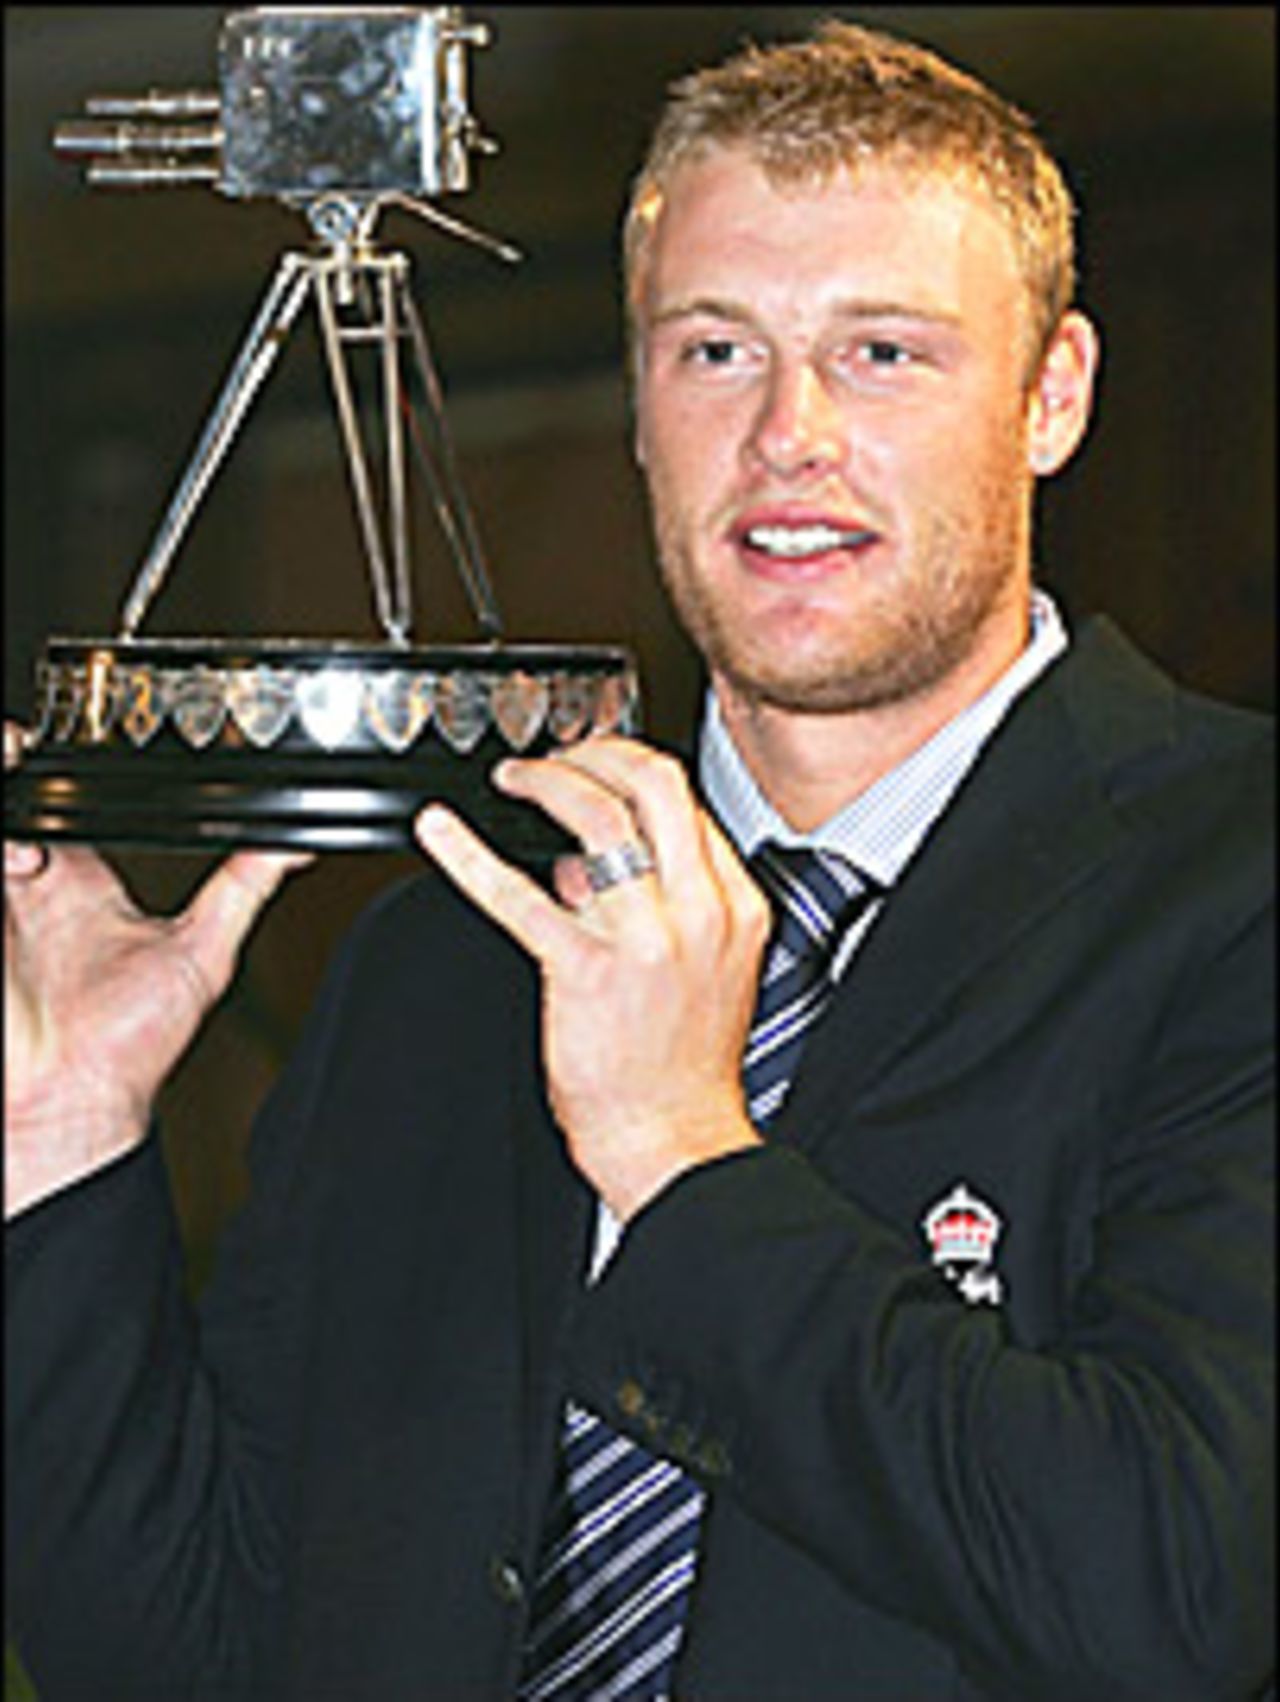 Andrew Flintoff with his award as the 2005 BBC Sports Personality of the Year, December 11, 2005